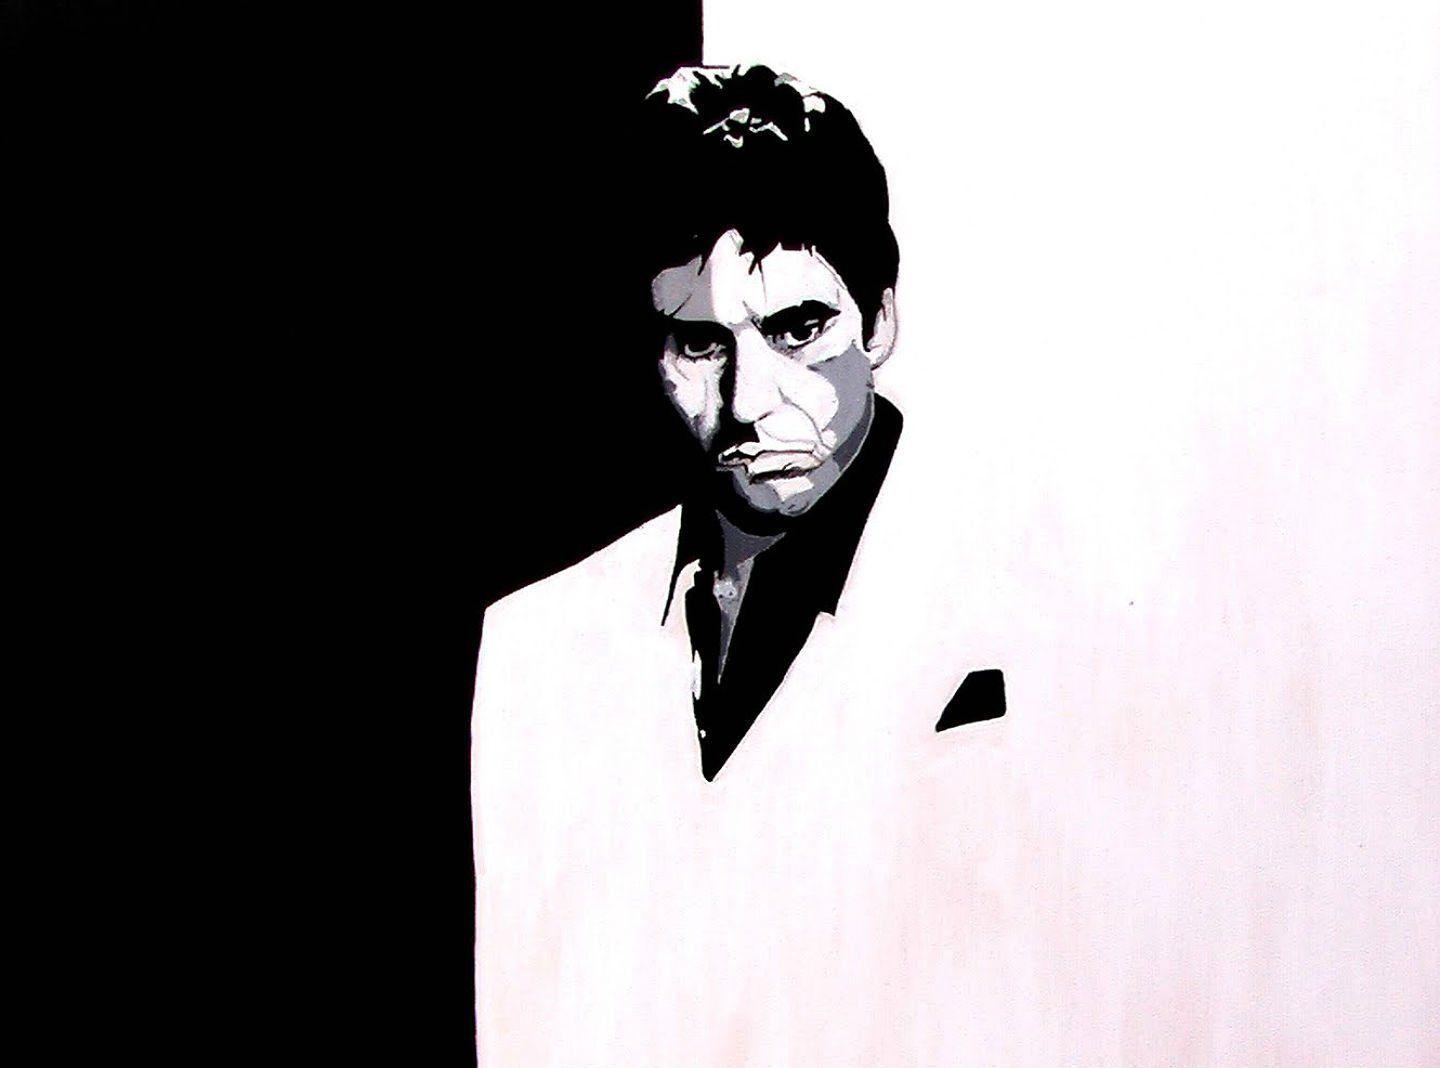 65 Scarface Wallpaper HD  Android iPhone Desktop HD Backgrounds   Wallpapers 1080p 4k png  jpg 2023